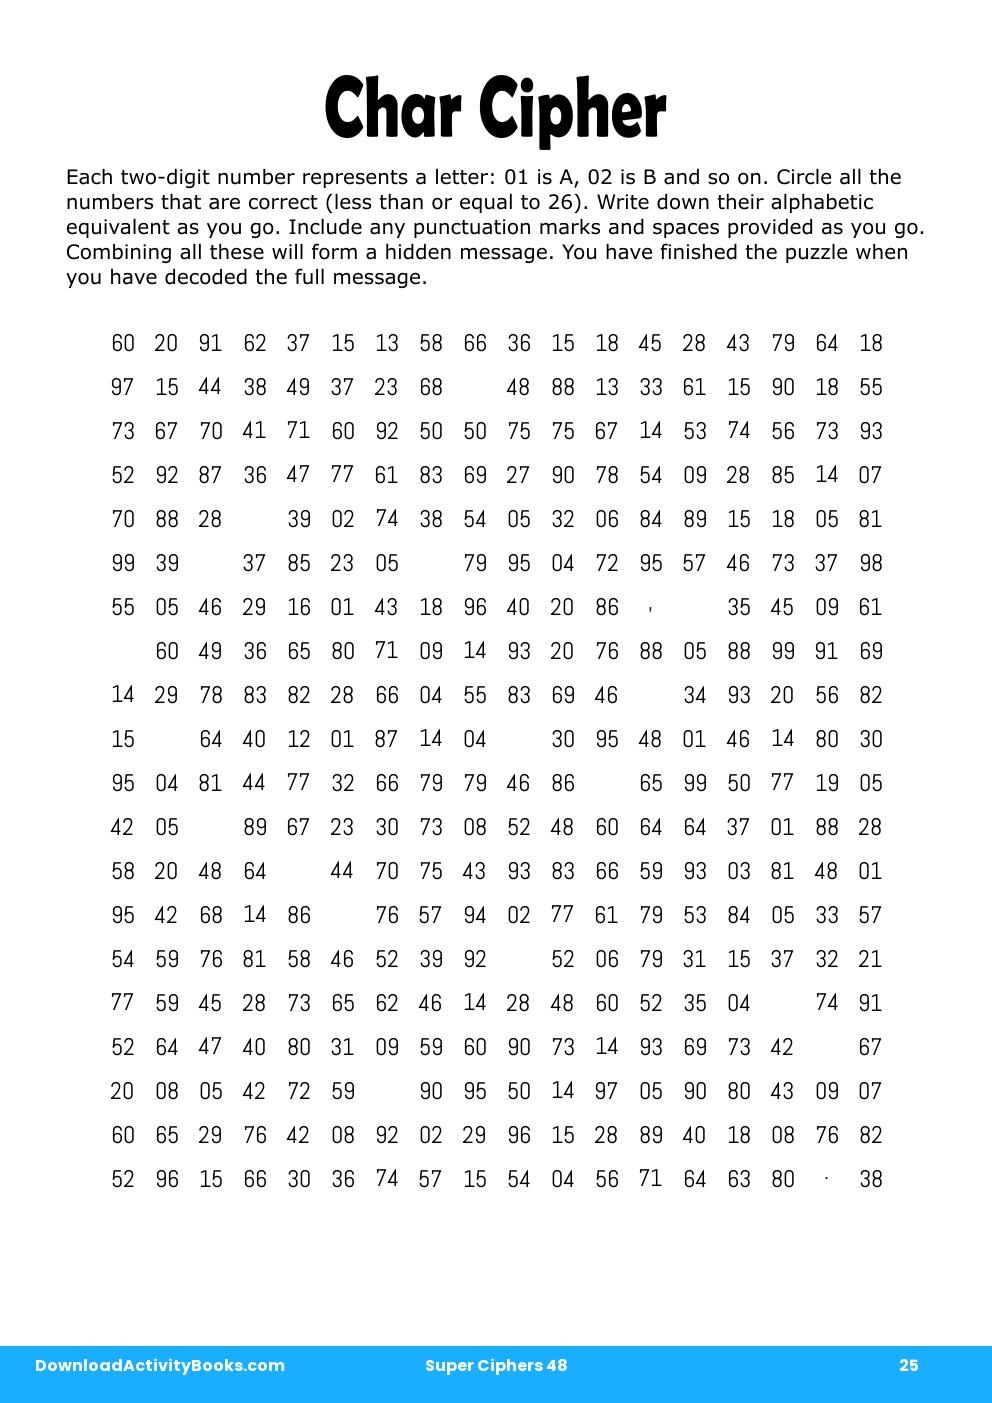 Char Cipher in Super Ciphers 48